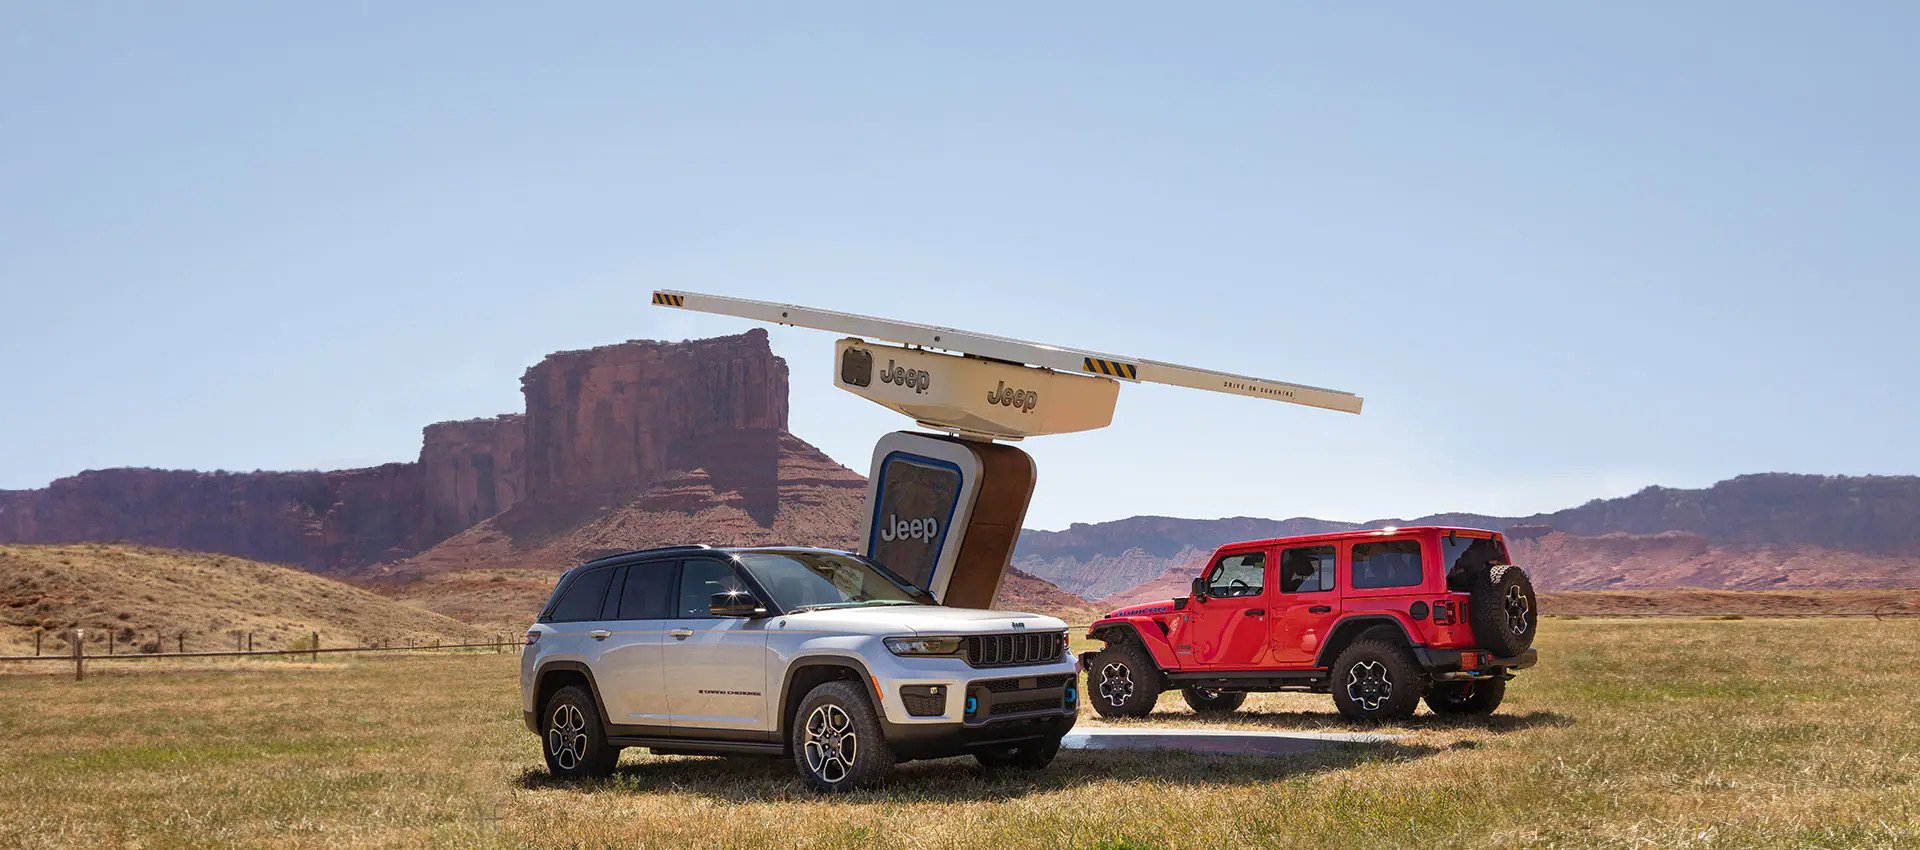 If you want an iconic Jeep that's unmistakable and perfect for any lifestyle, stop by Franklin Chrysler Dodge Jeep Ram. 